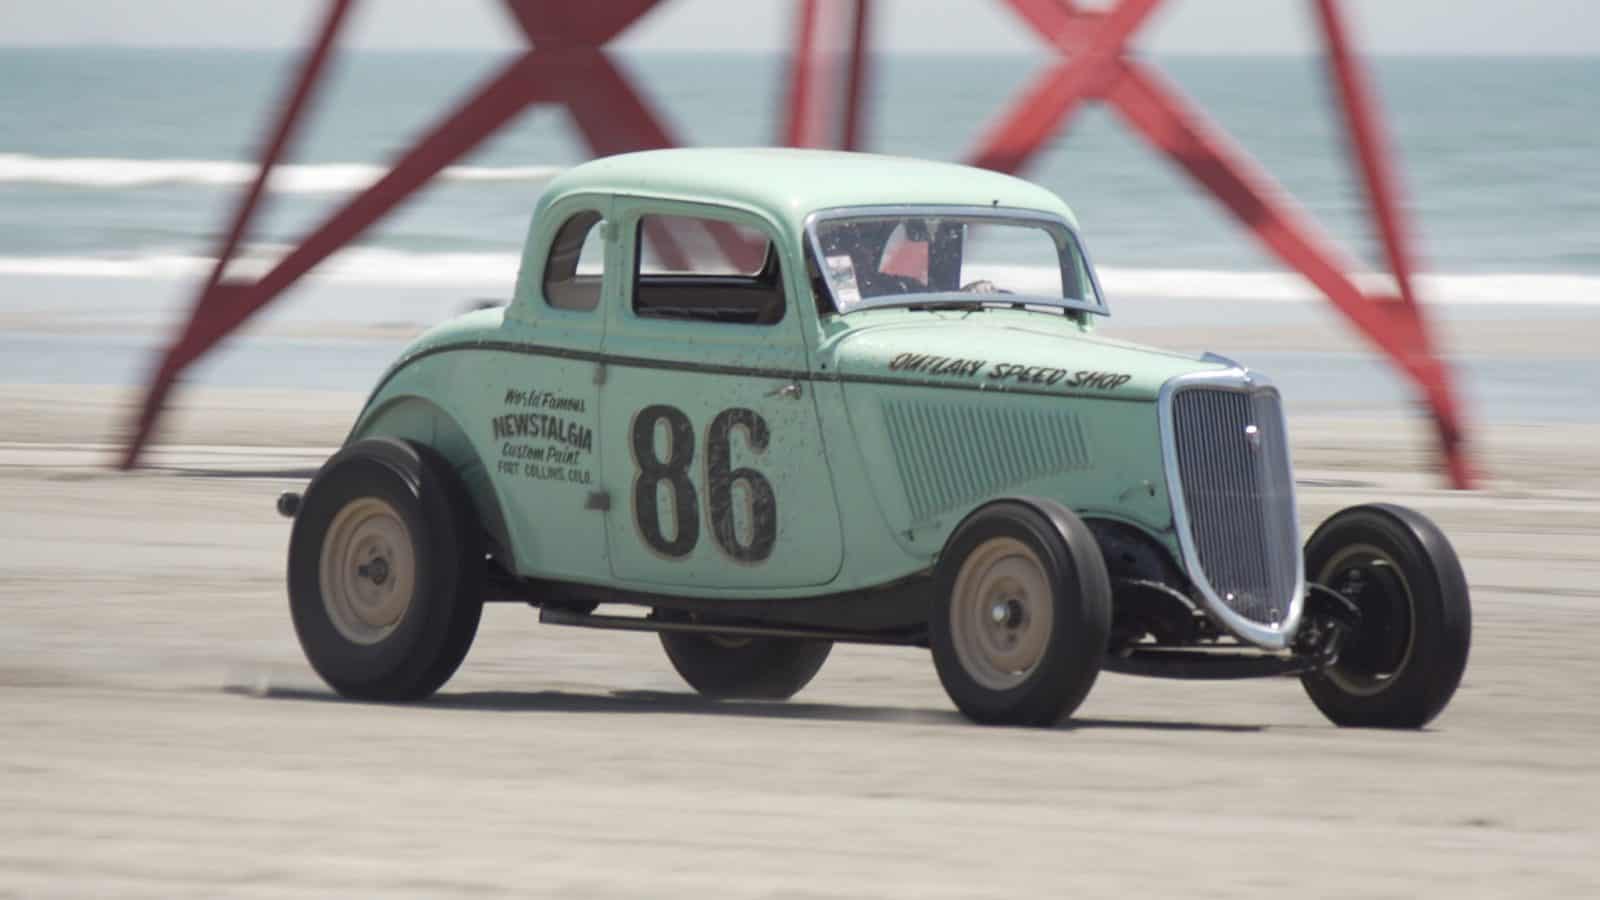 Traditional Hot Rod racing on the Beach at The Race of Gentlemen